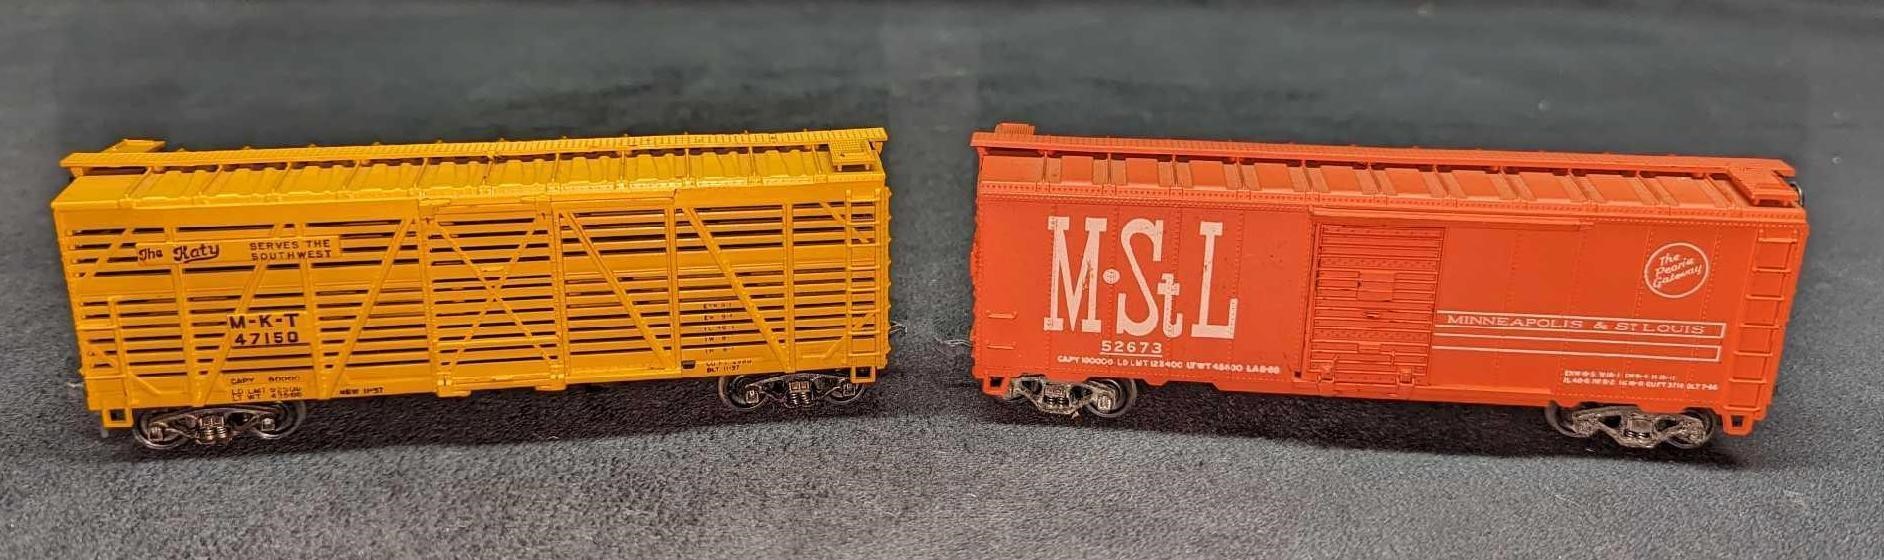 HO Scale Stock Cattle Car & Minneapolis Boxcar